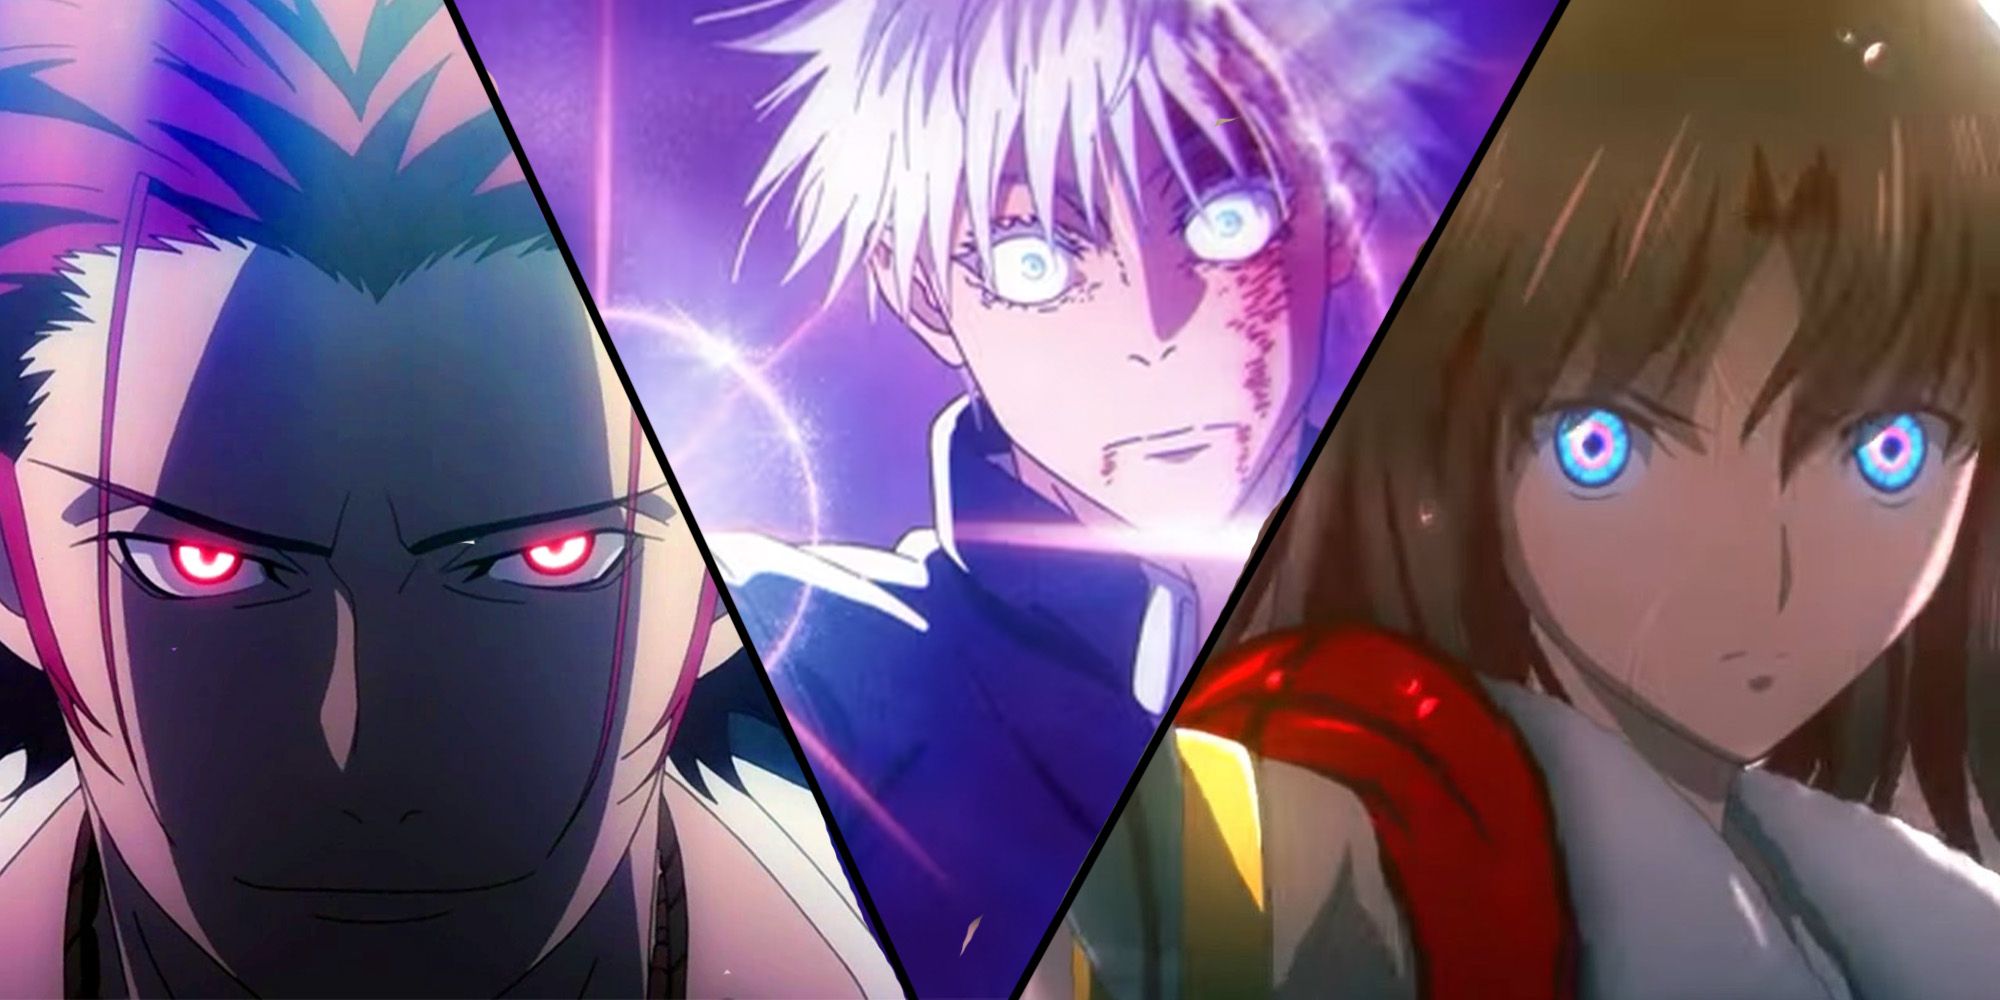 10 anime superpowers that exist in real life